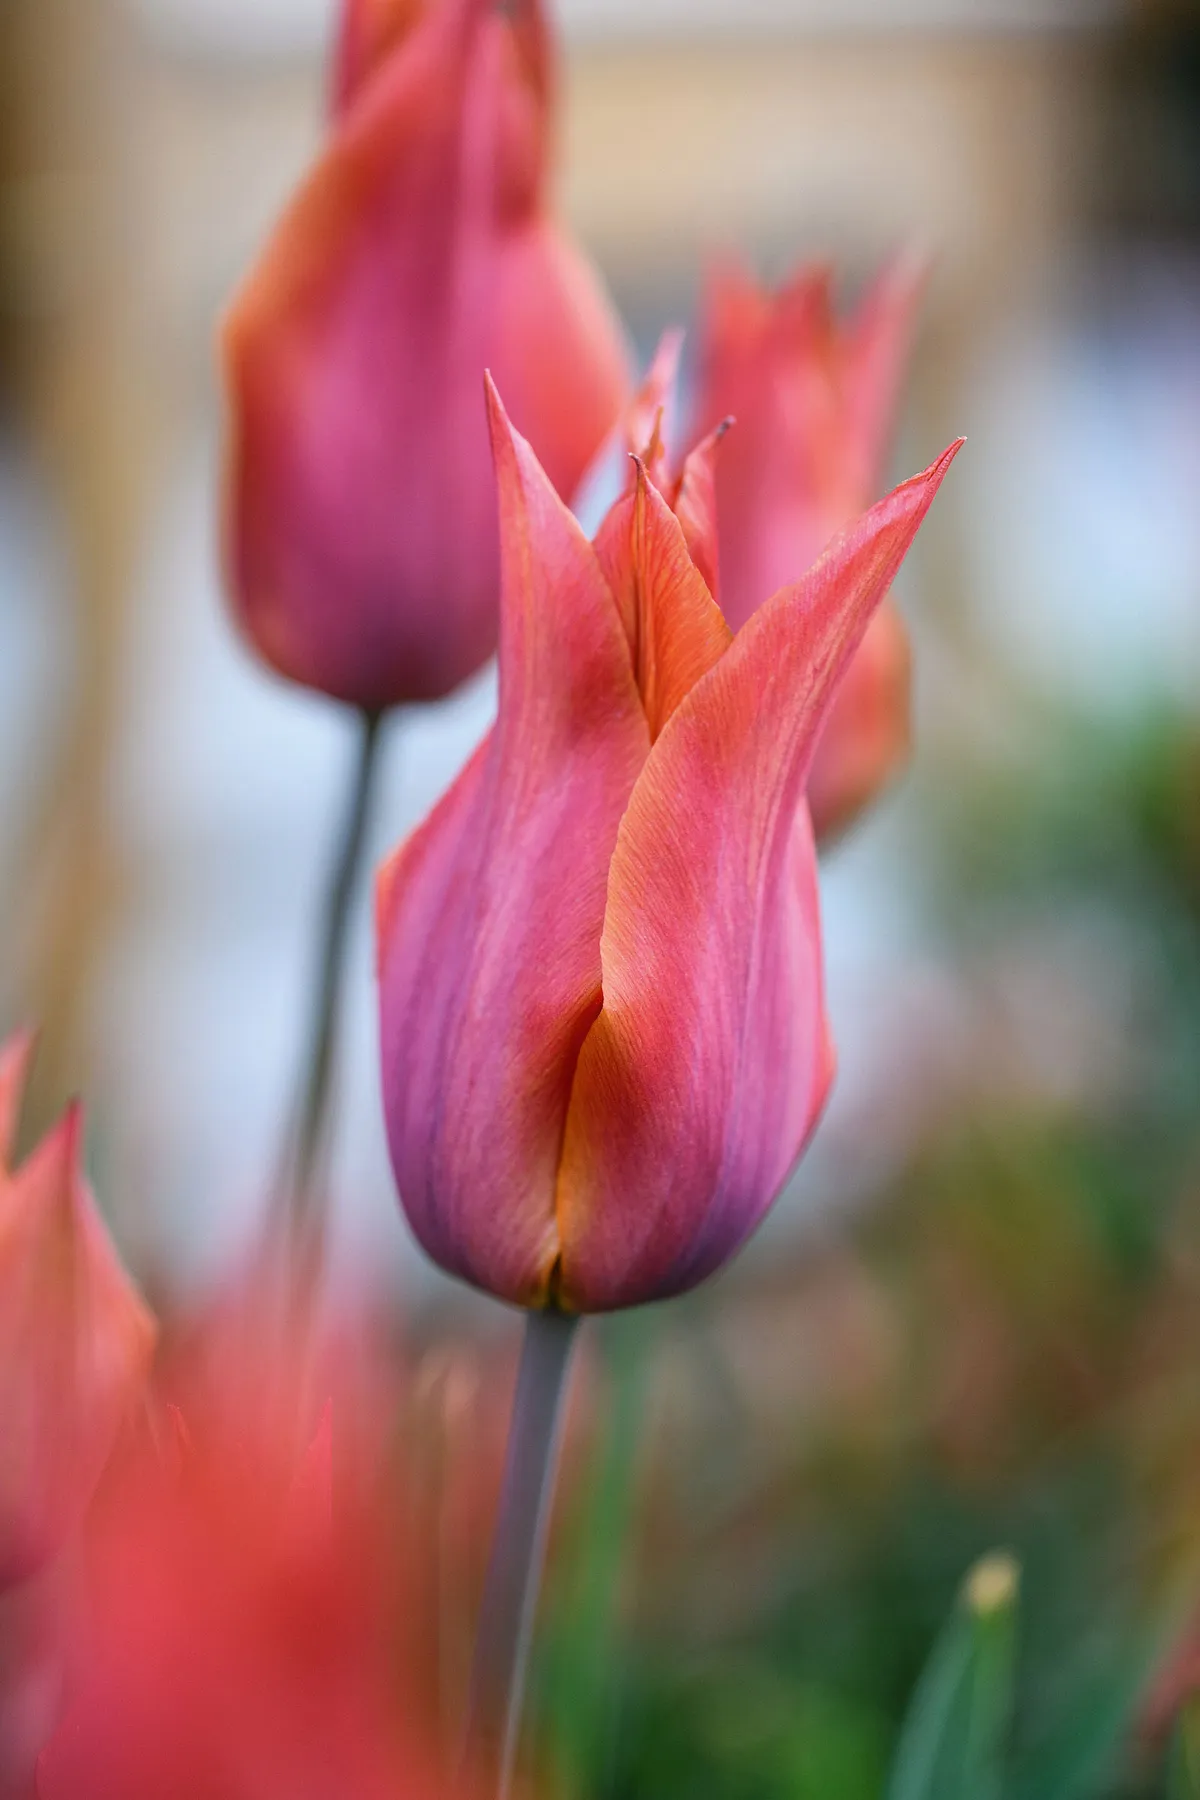 A tulip from the Cambridge Mosque